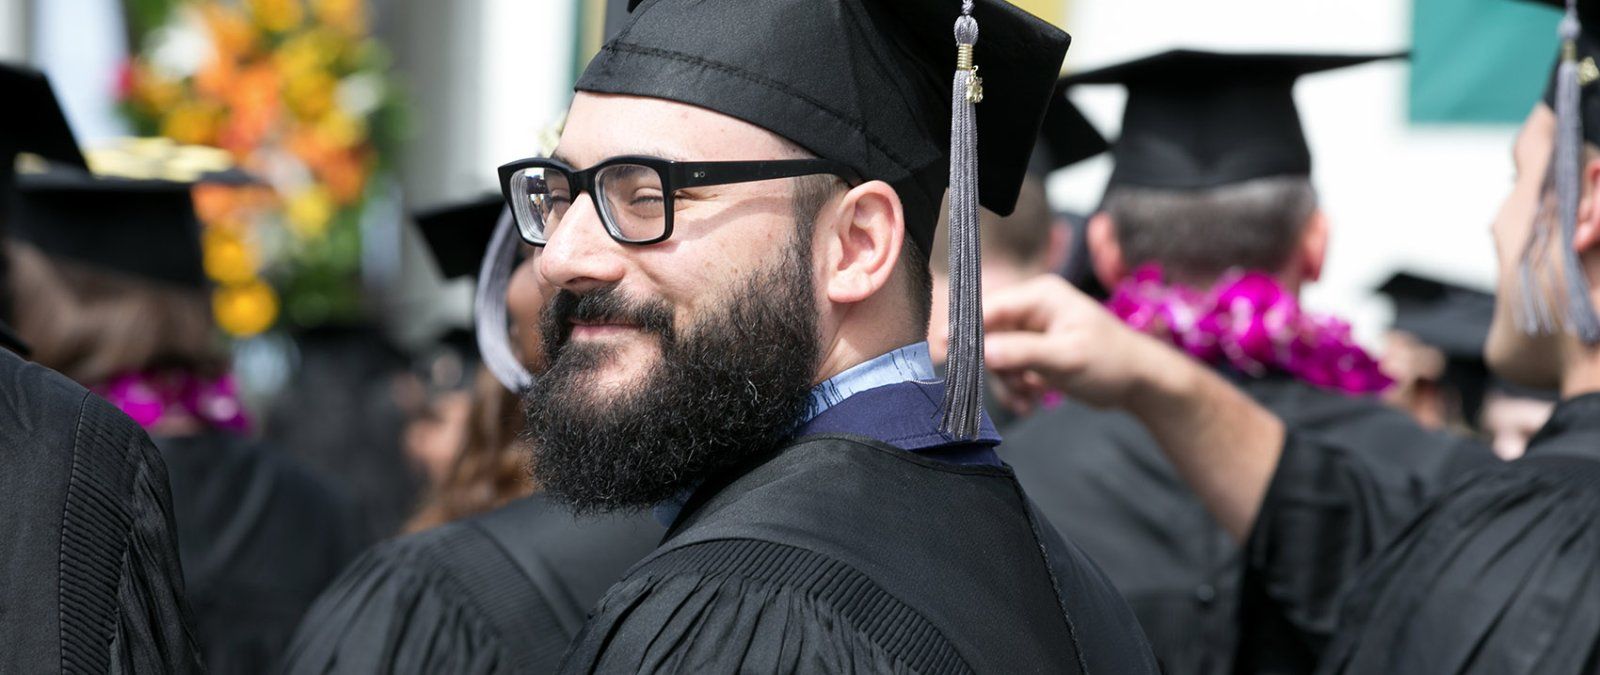 A PLNU graduate student smiles as he stands for graduation